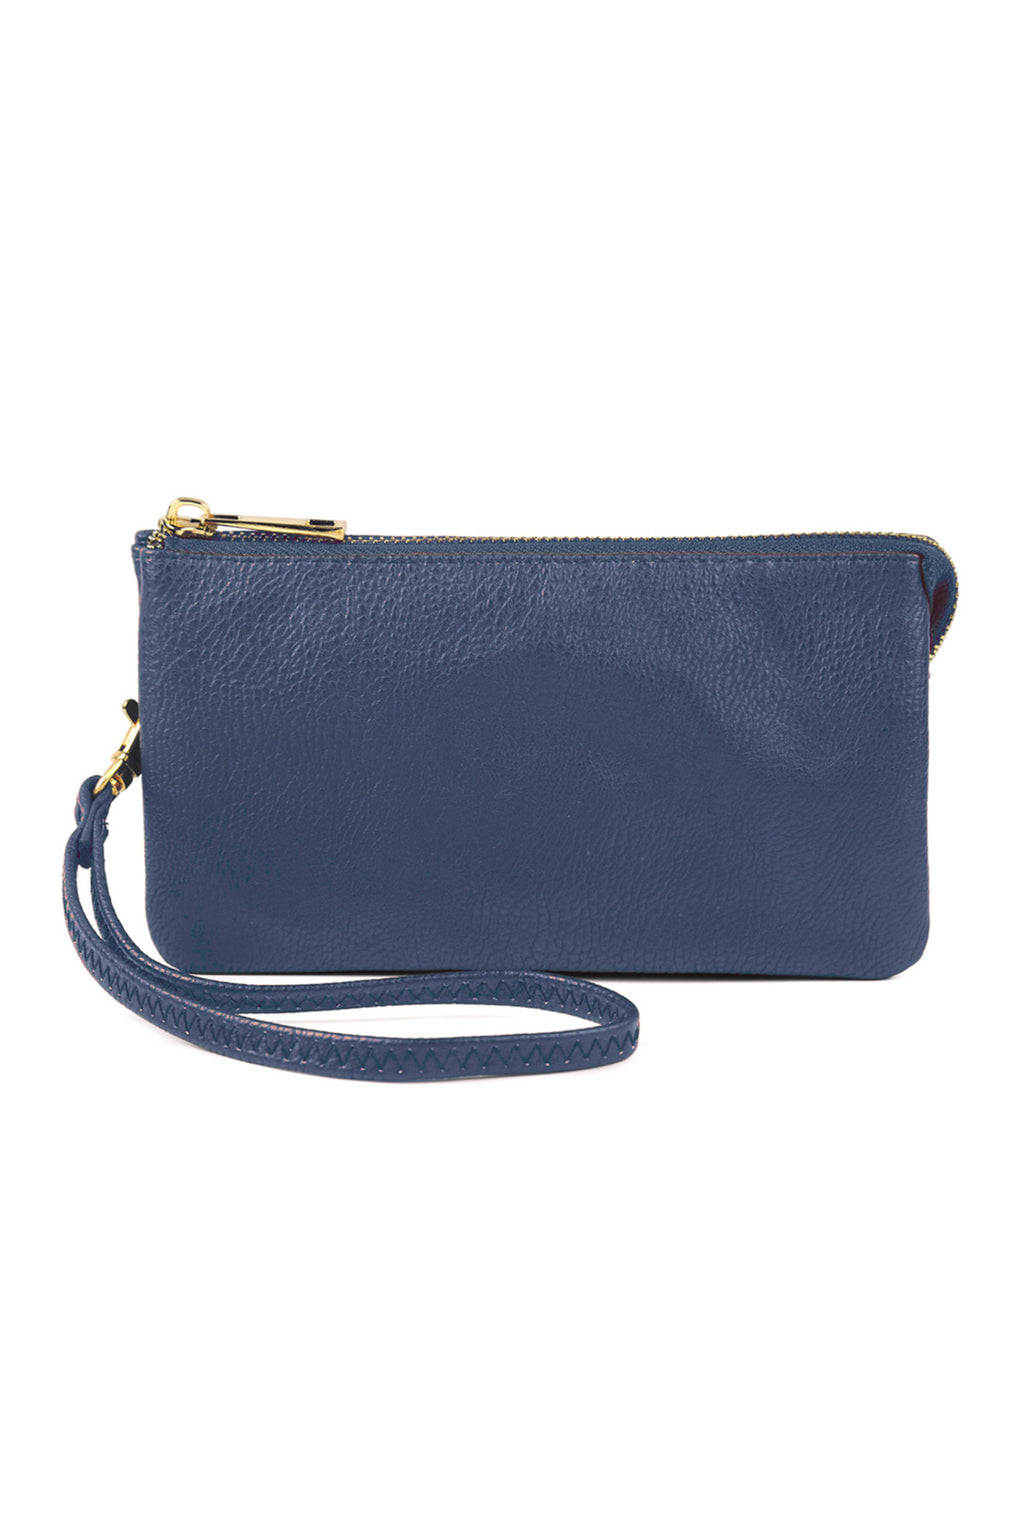 Leather Wallet with Detachable Wristlet Navy - Pack of 6